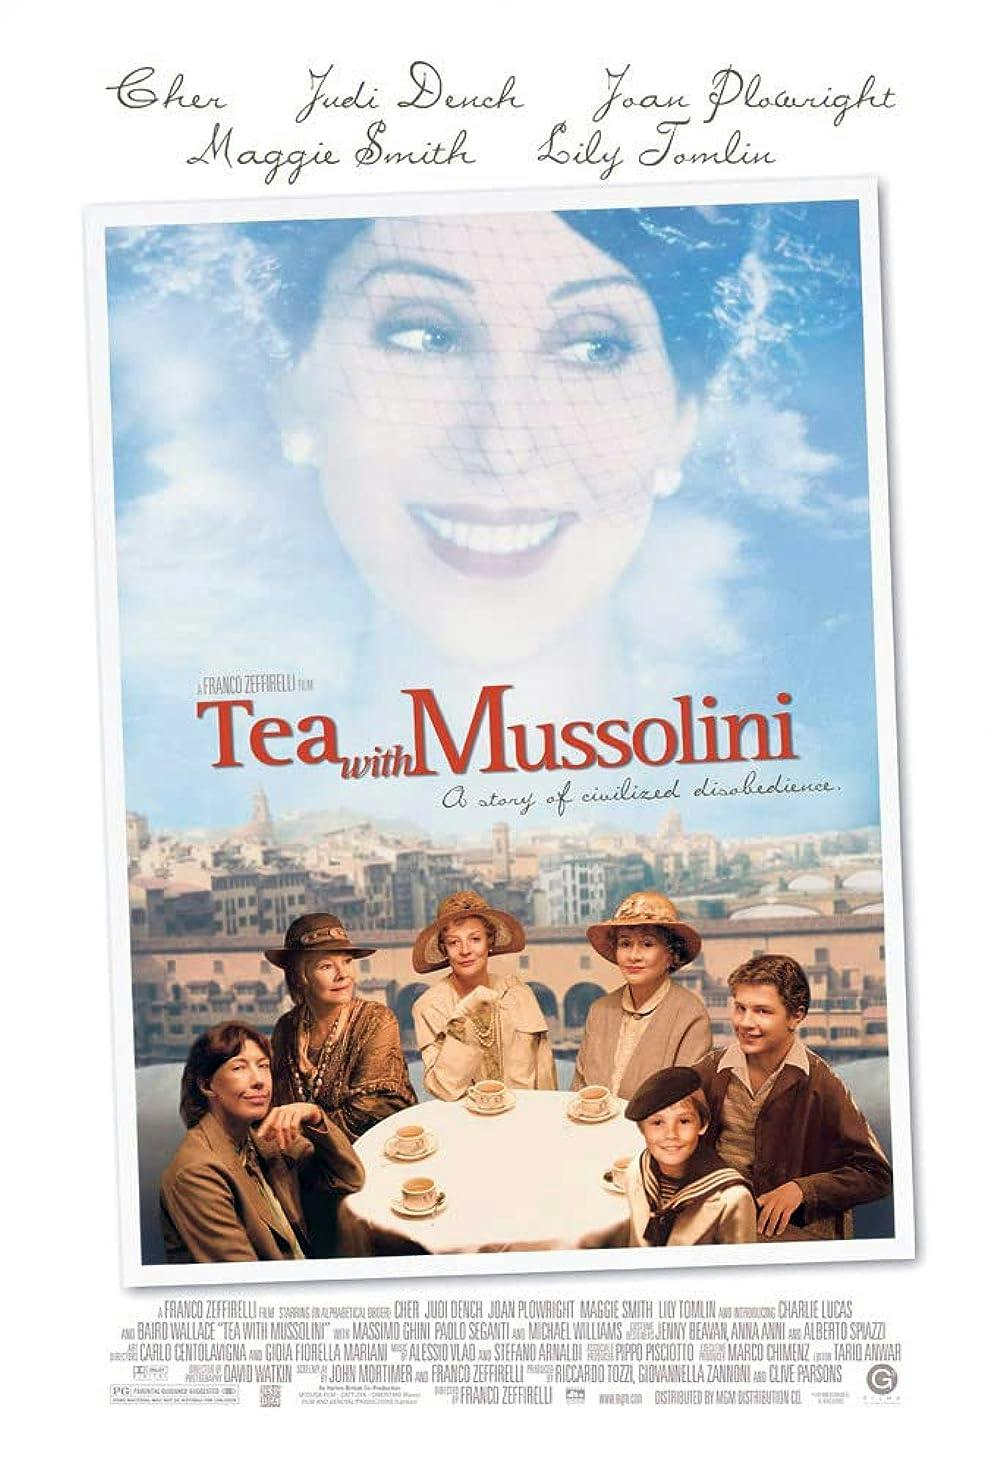 Rated or Dated: Tea with Mussolini (1999)